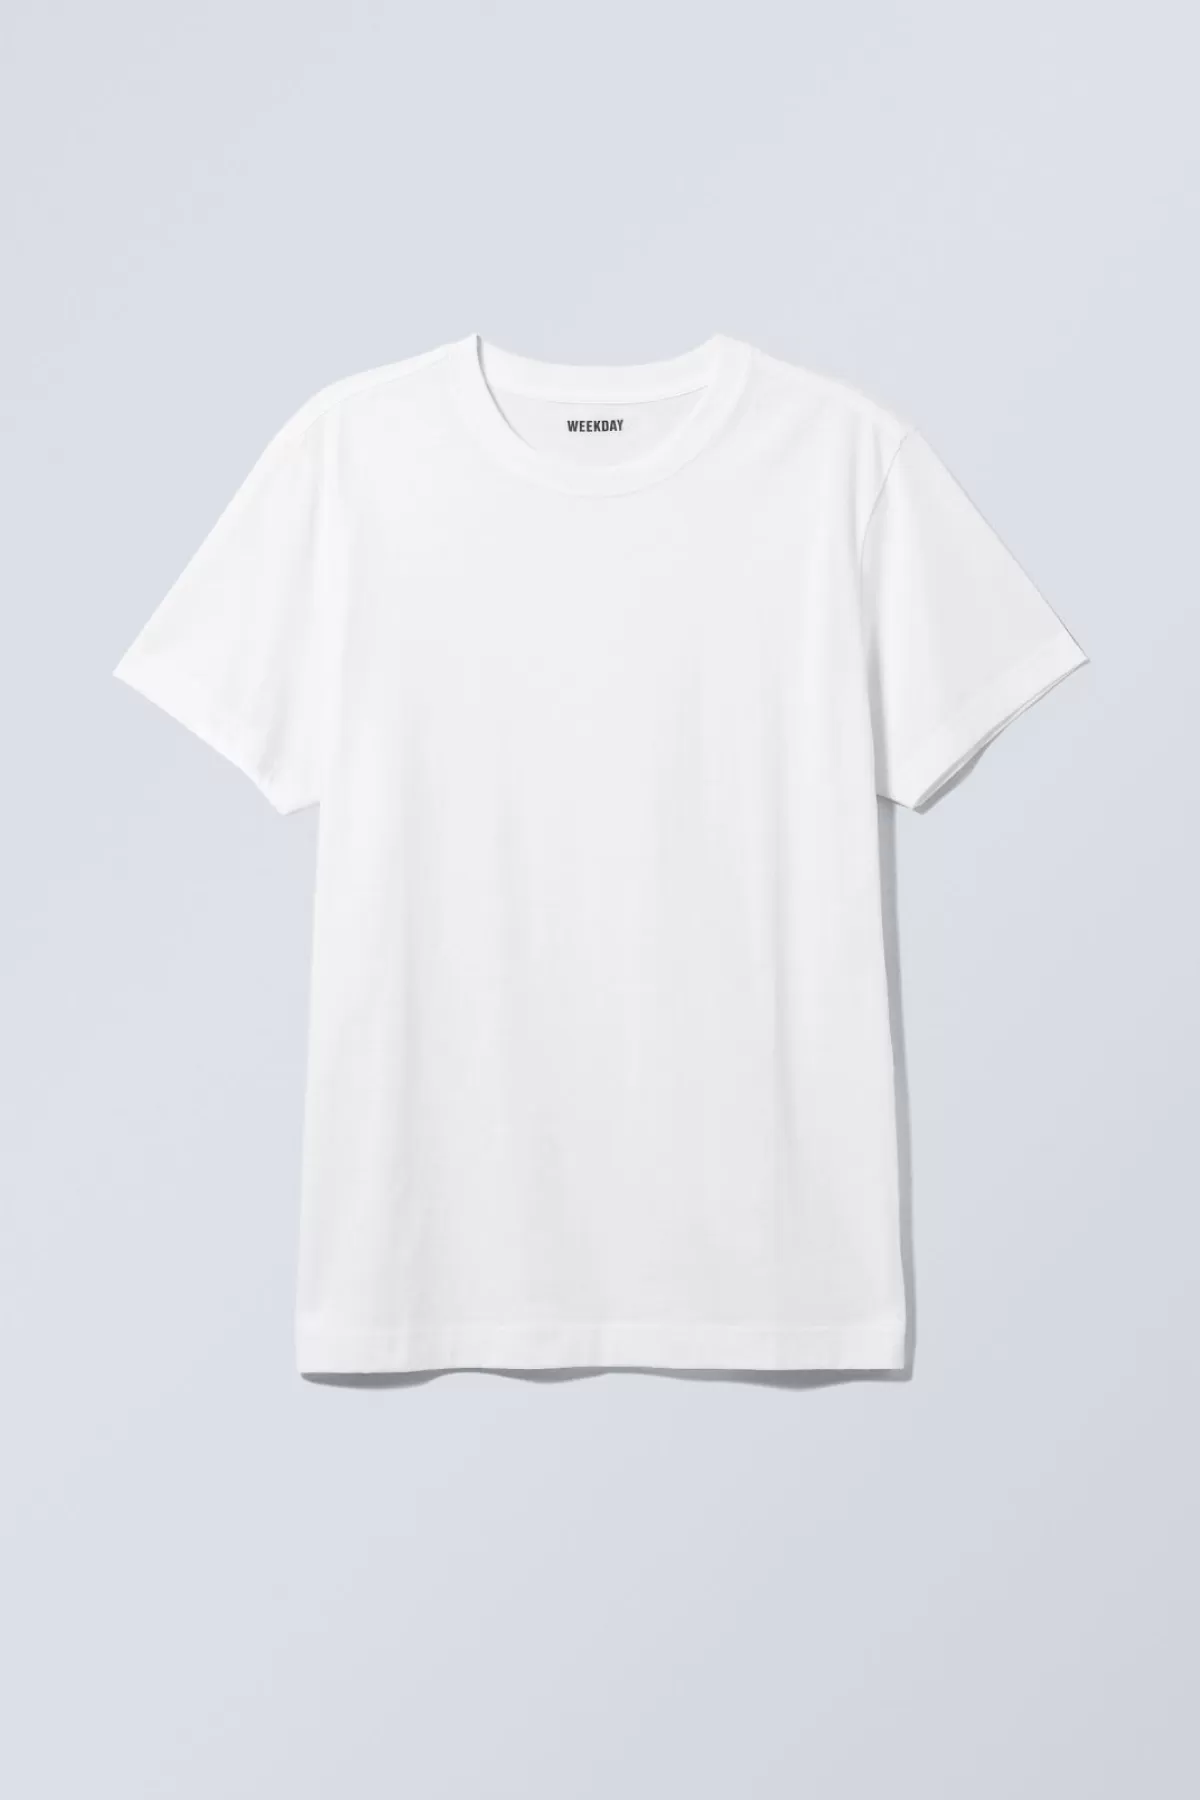 Weekday Relaxed Midweight T- shirt Store